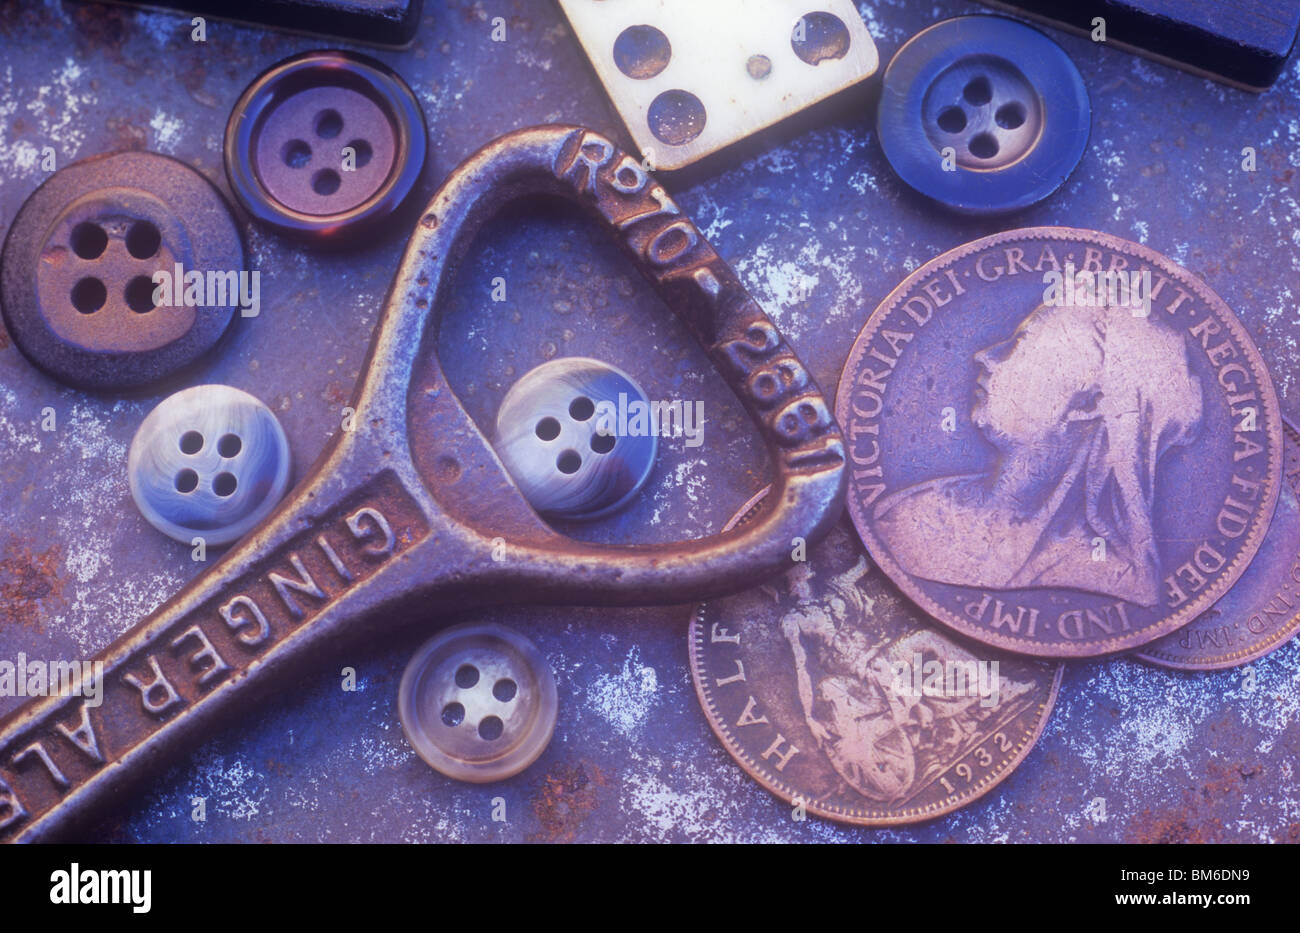 Old bottle opener with domino pieces male buttons and three old British coins lying on rusting metal tray Stock Photo